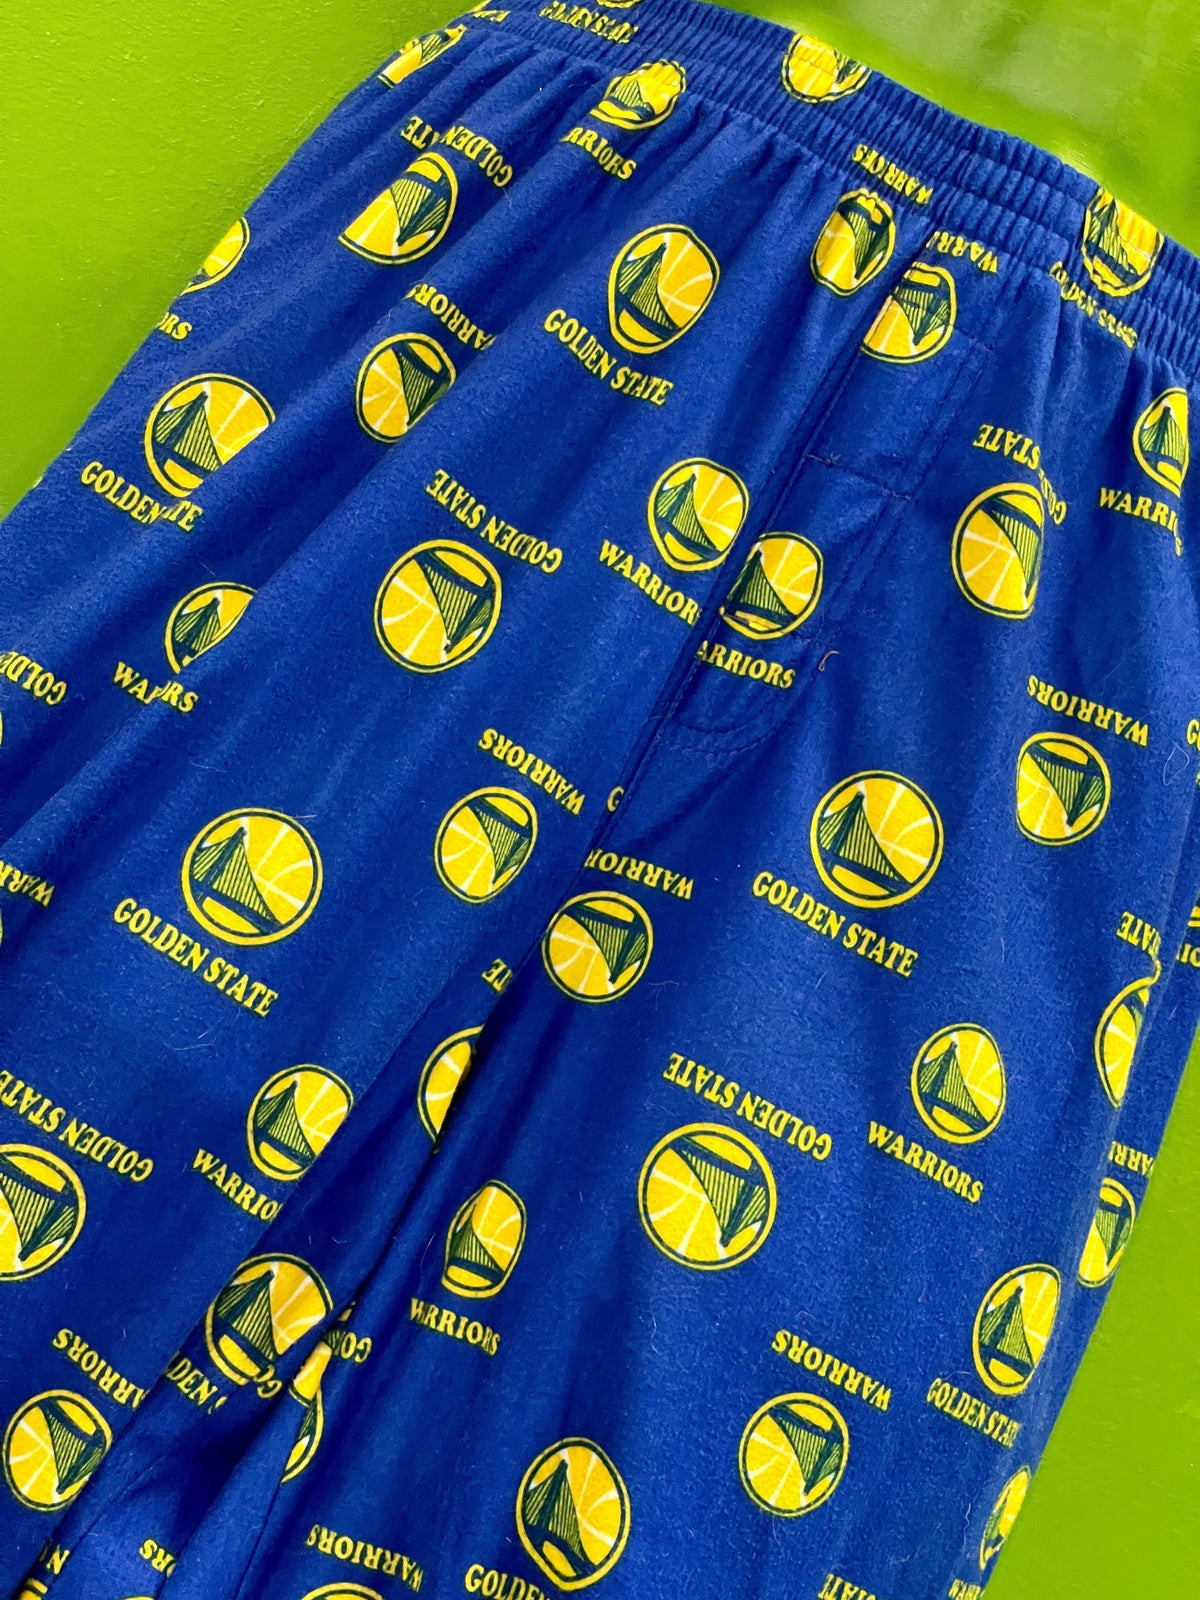 NBA Golden State Warriors Pyjama Bottoms Trousers Youth X-Large 18-20